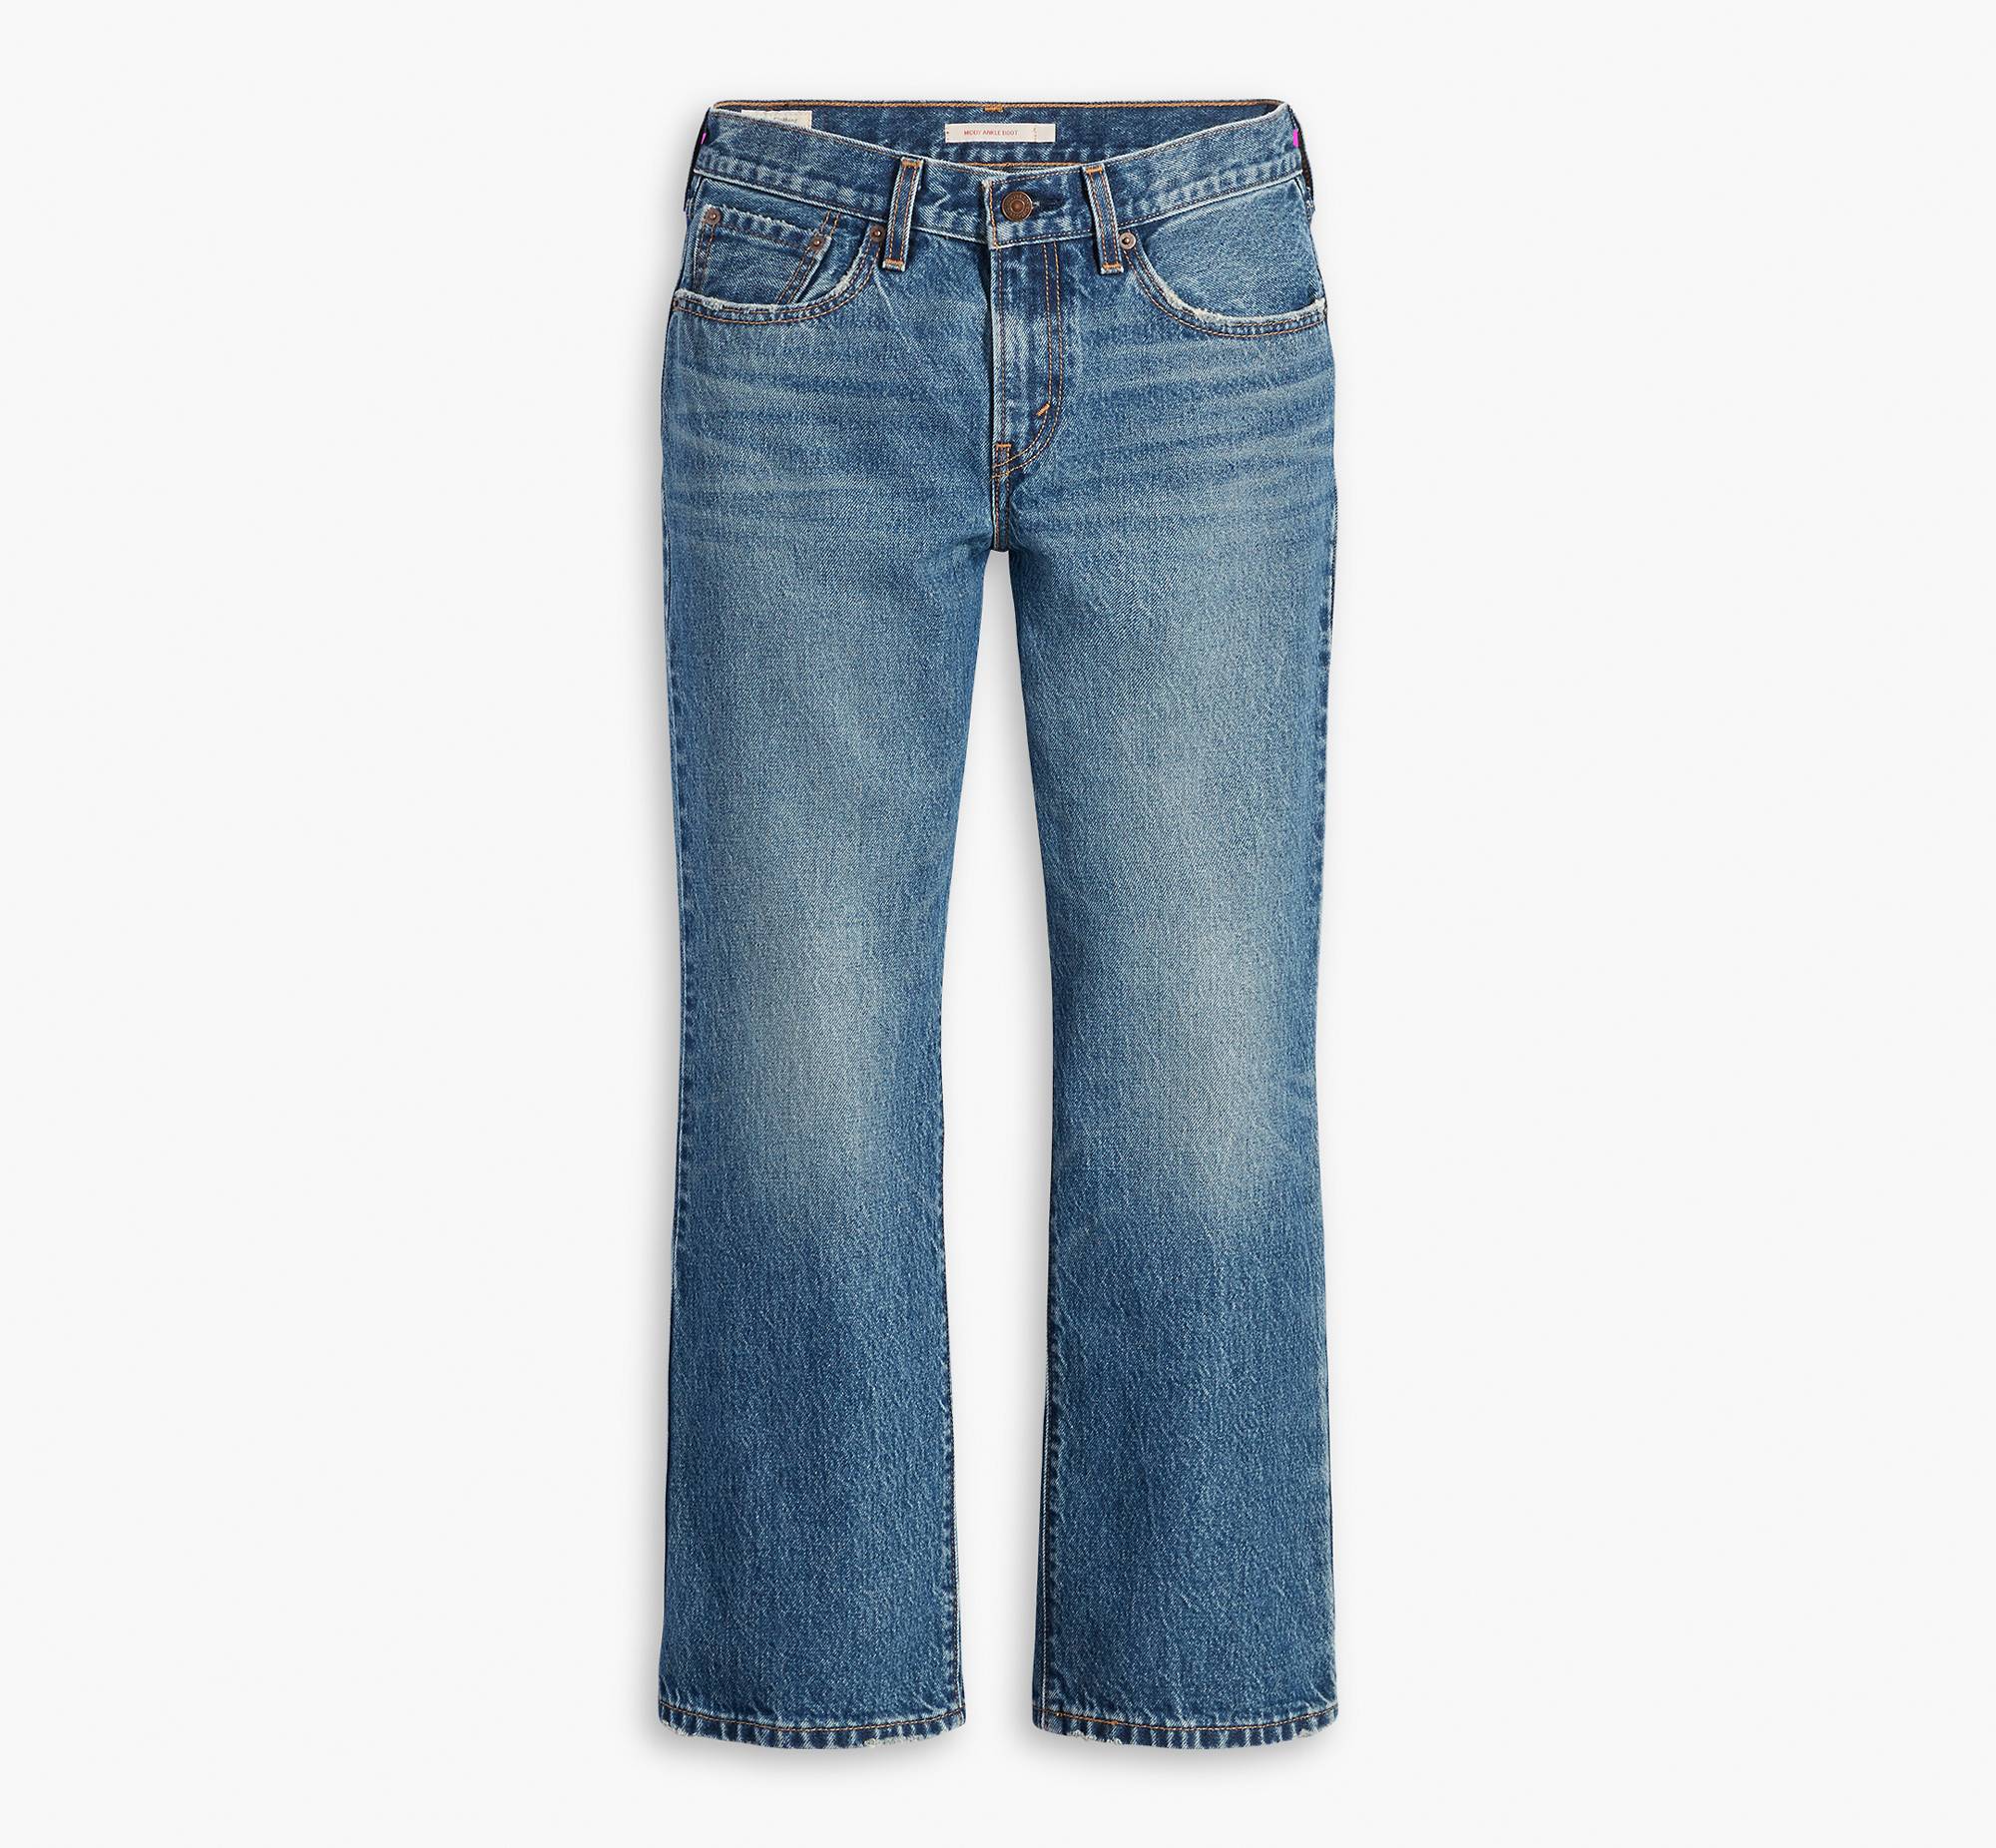 Middy Bootcut Jeans 6